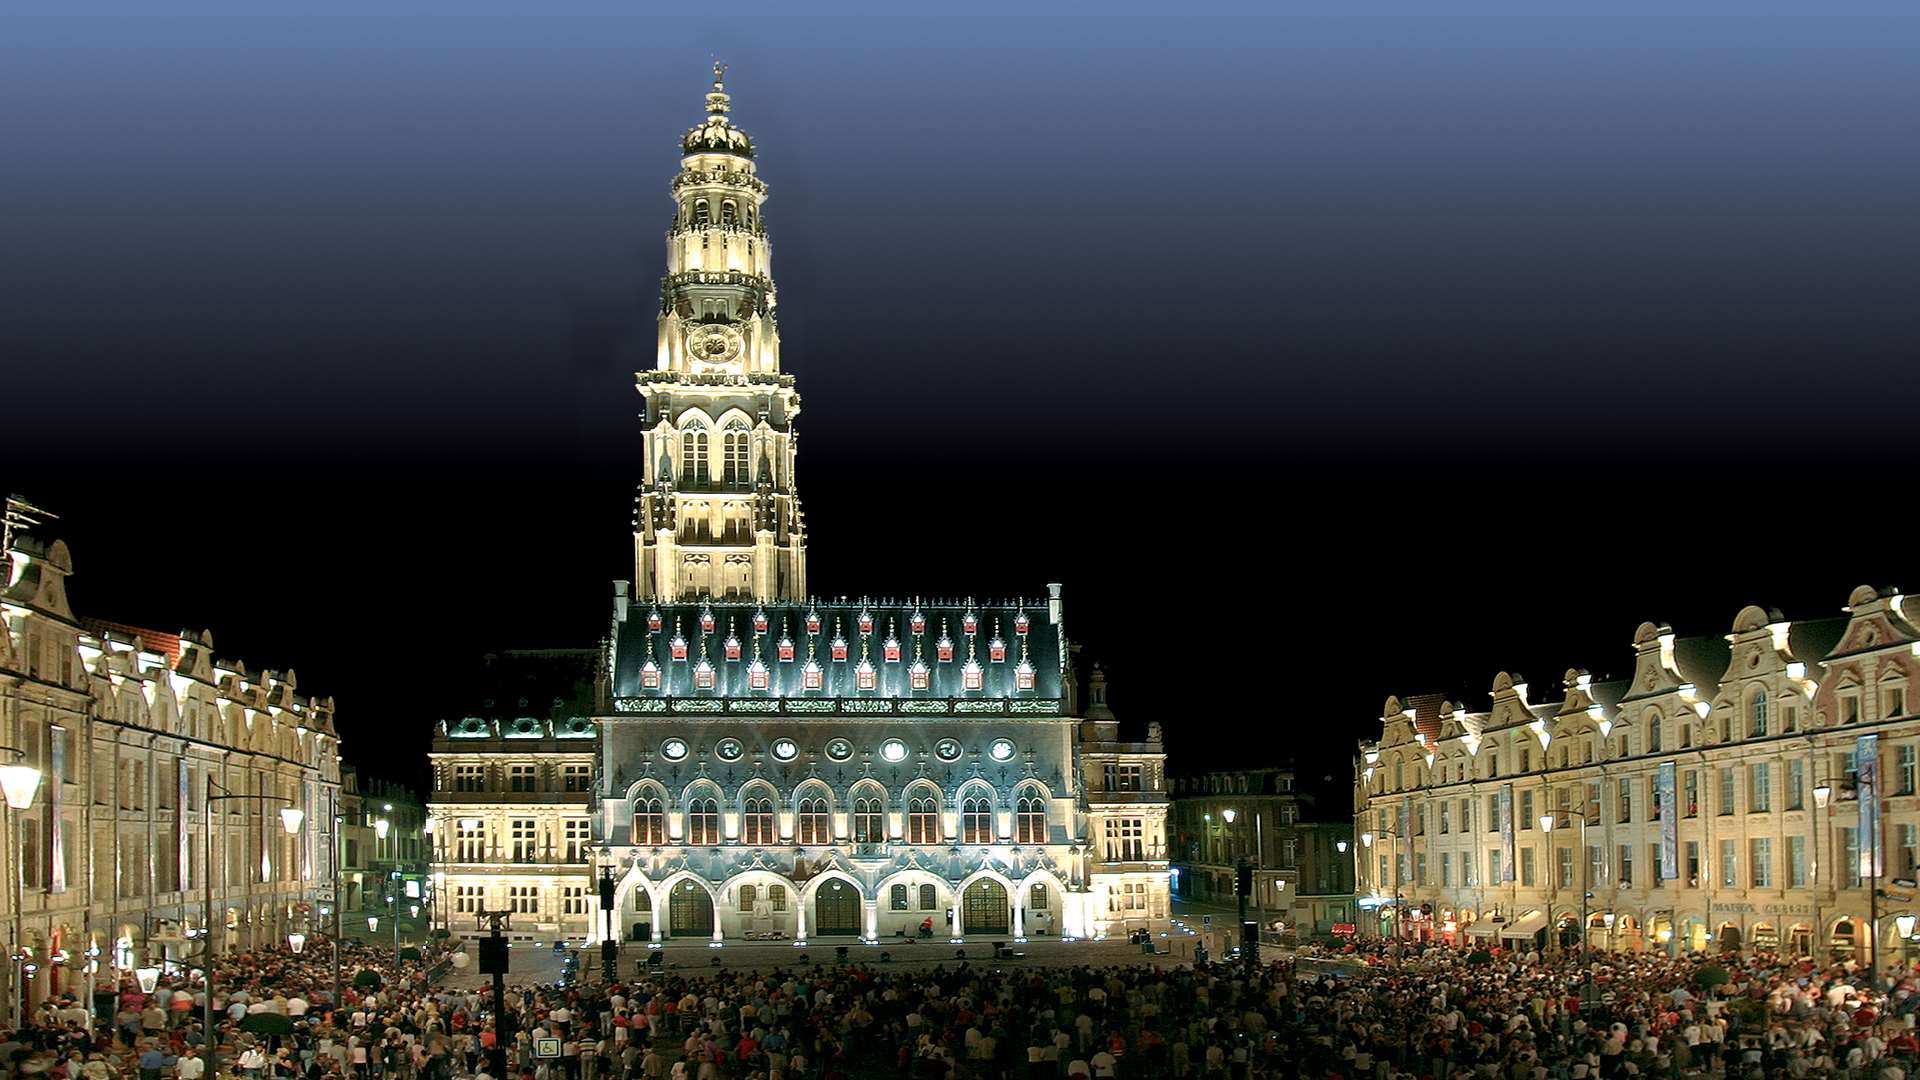 Events take place all year round in Arras